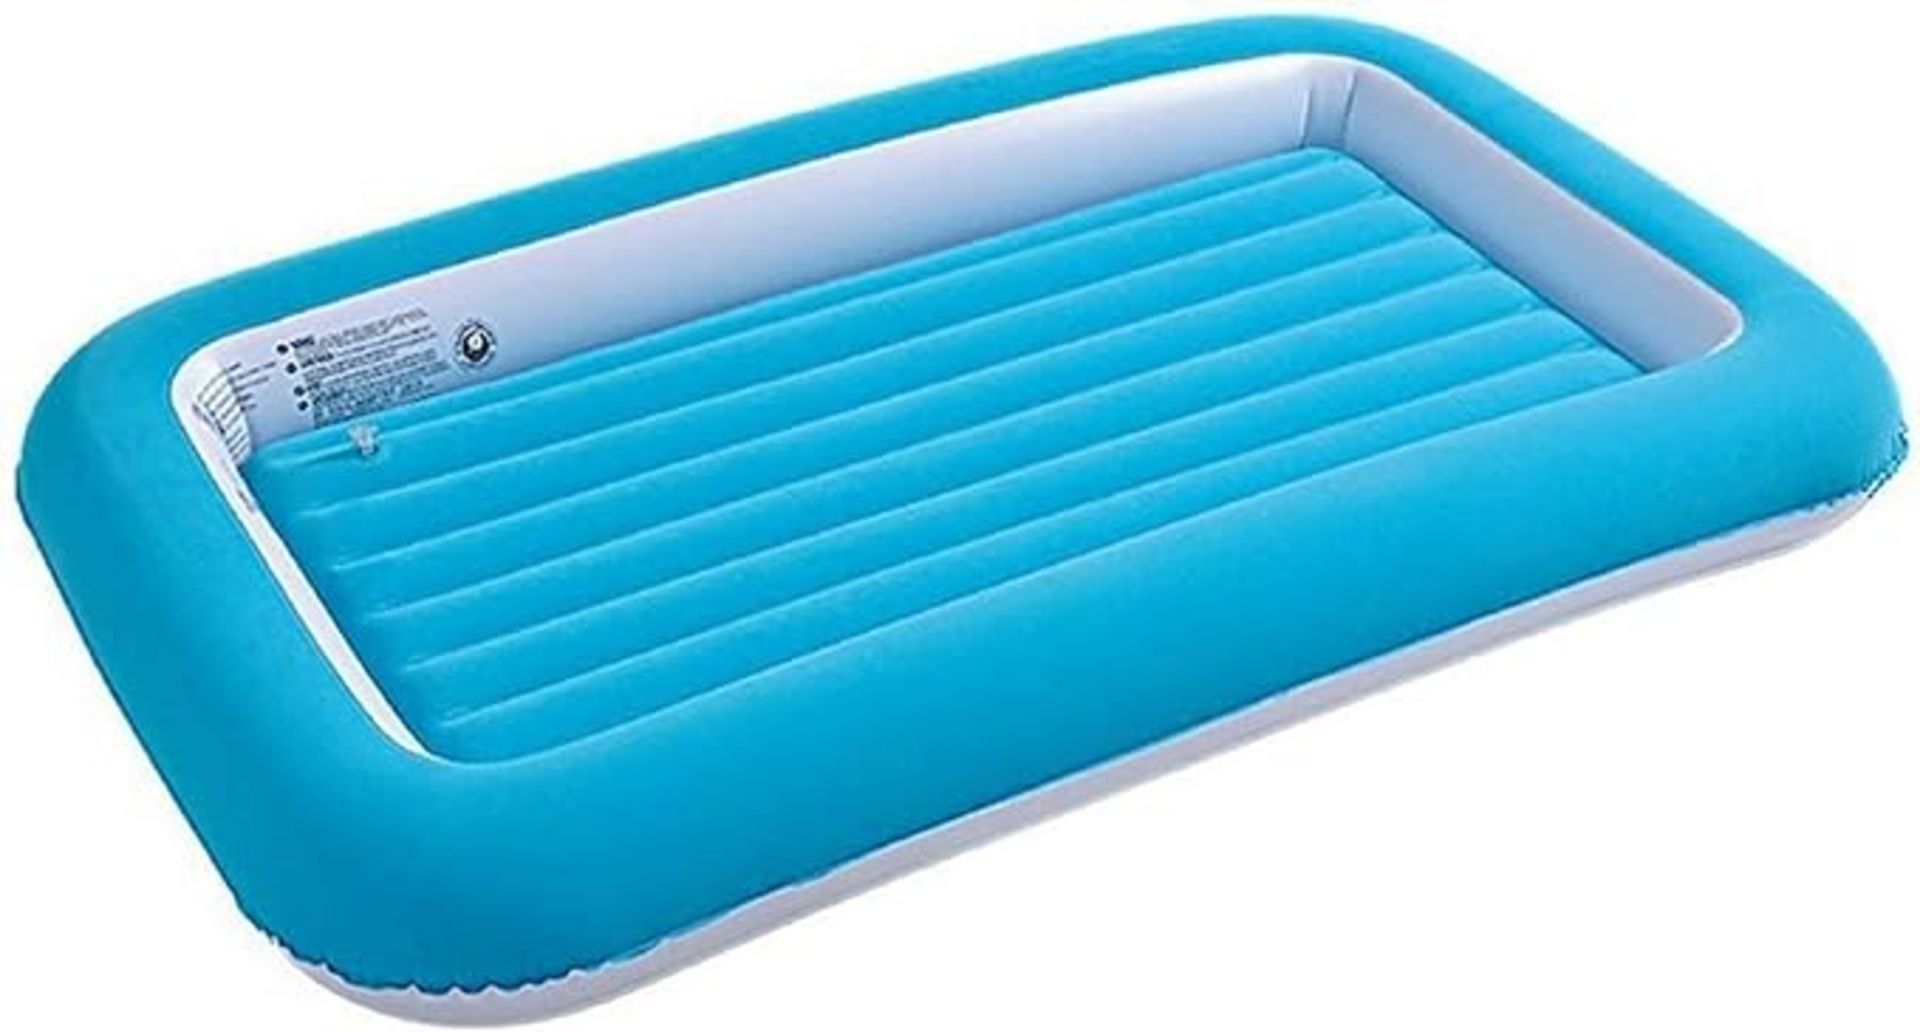 Avenli Kids Airbed 152x89cm - BW. BLUE KIDS SINGLE AIRBED - This children’s blue coloured airbed